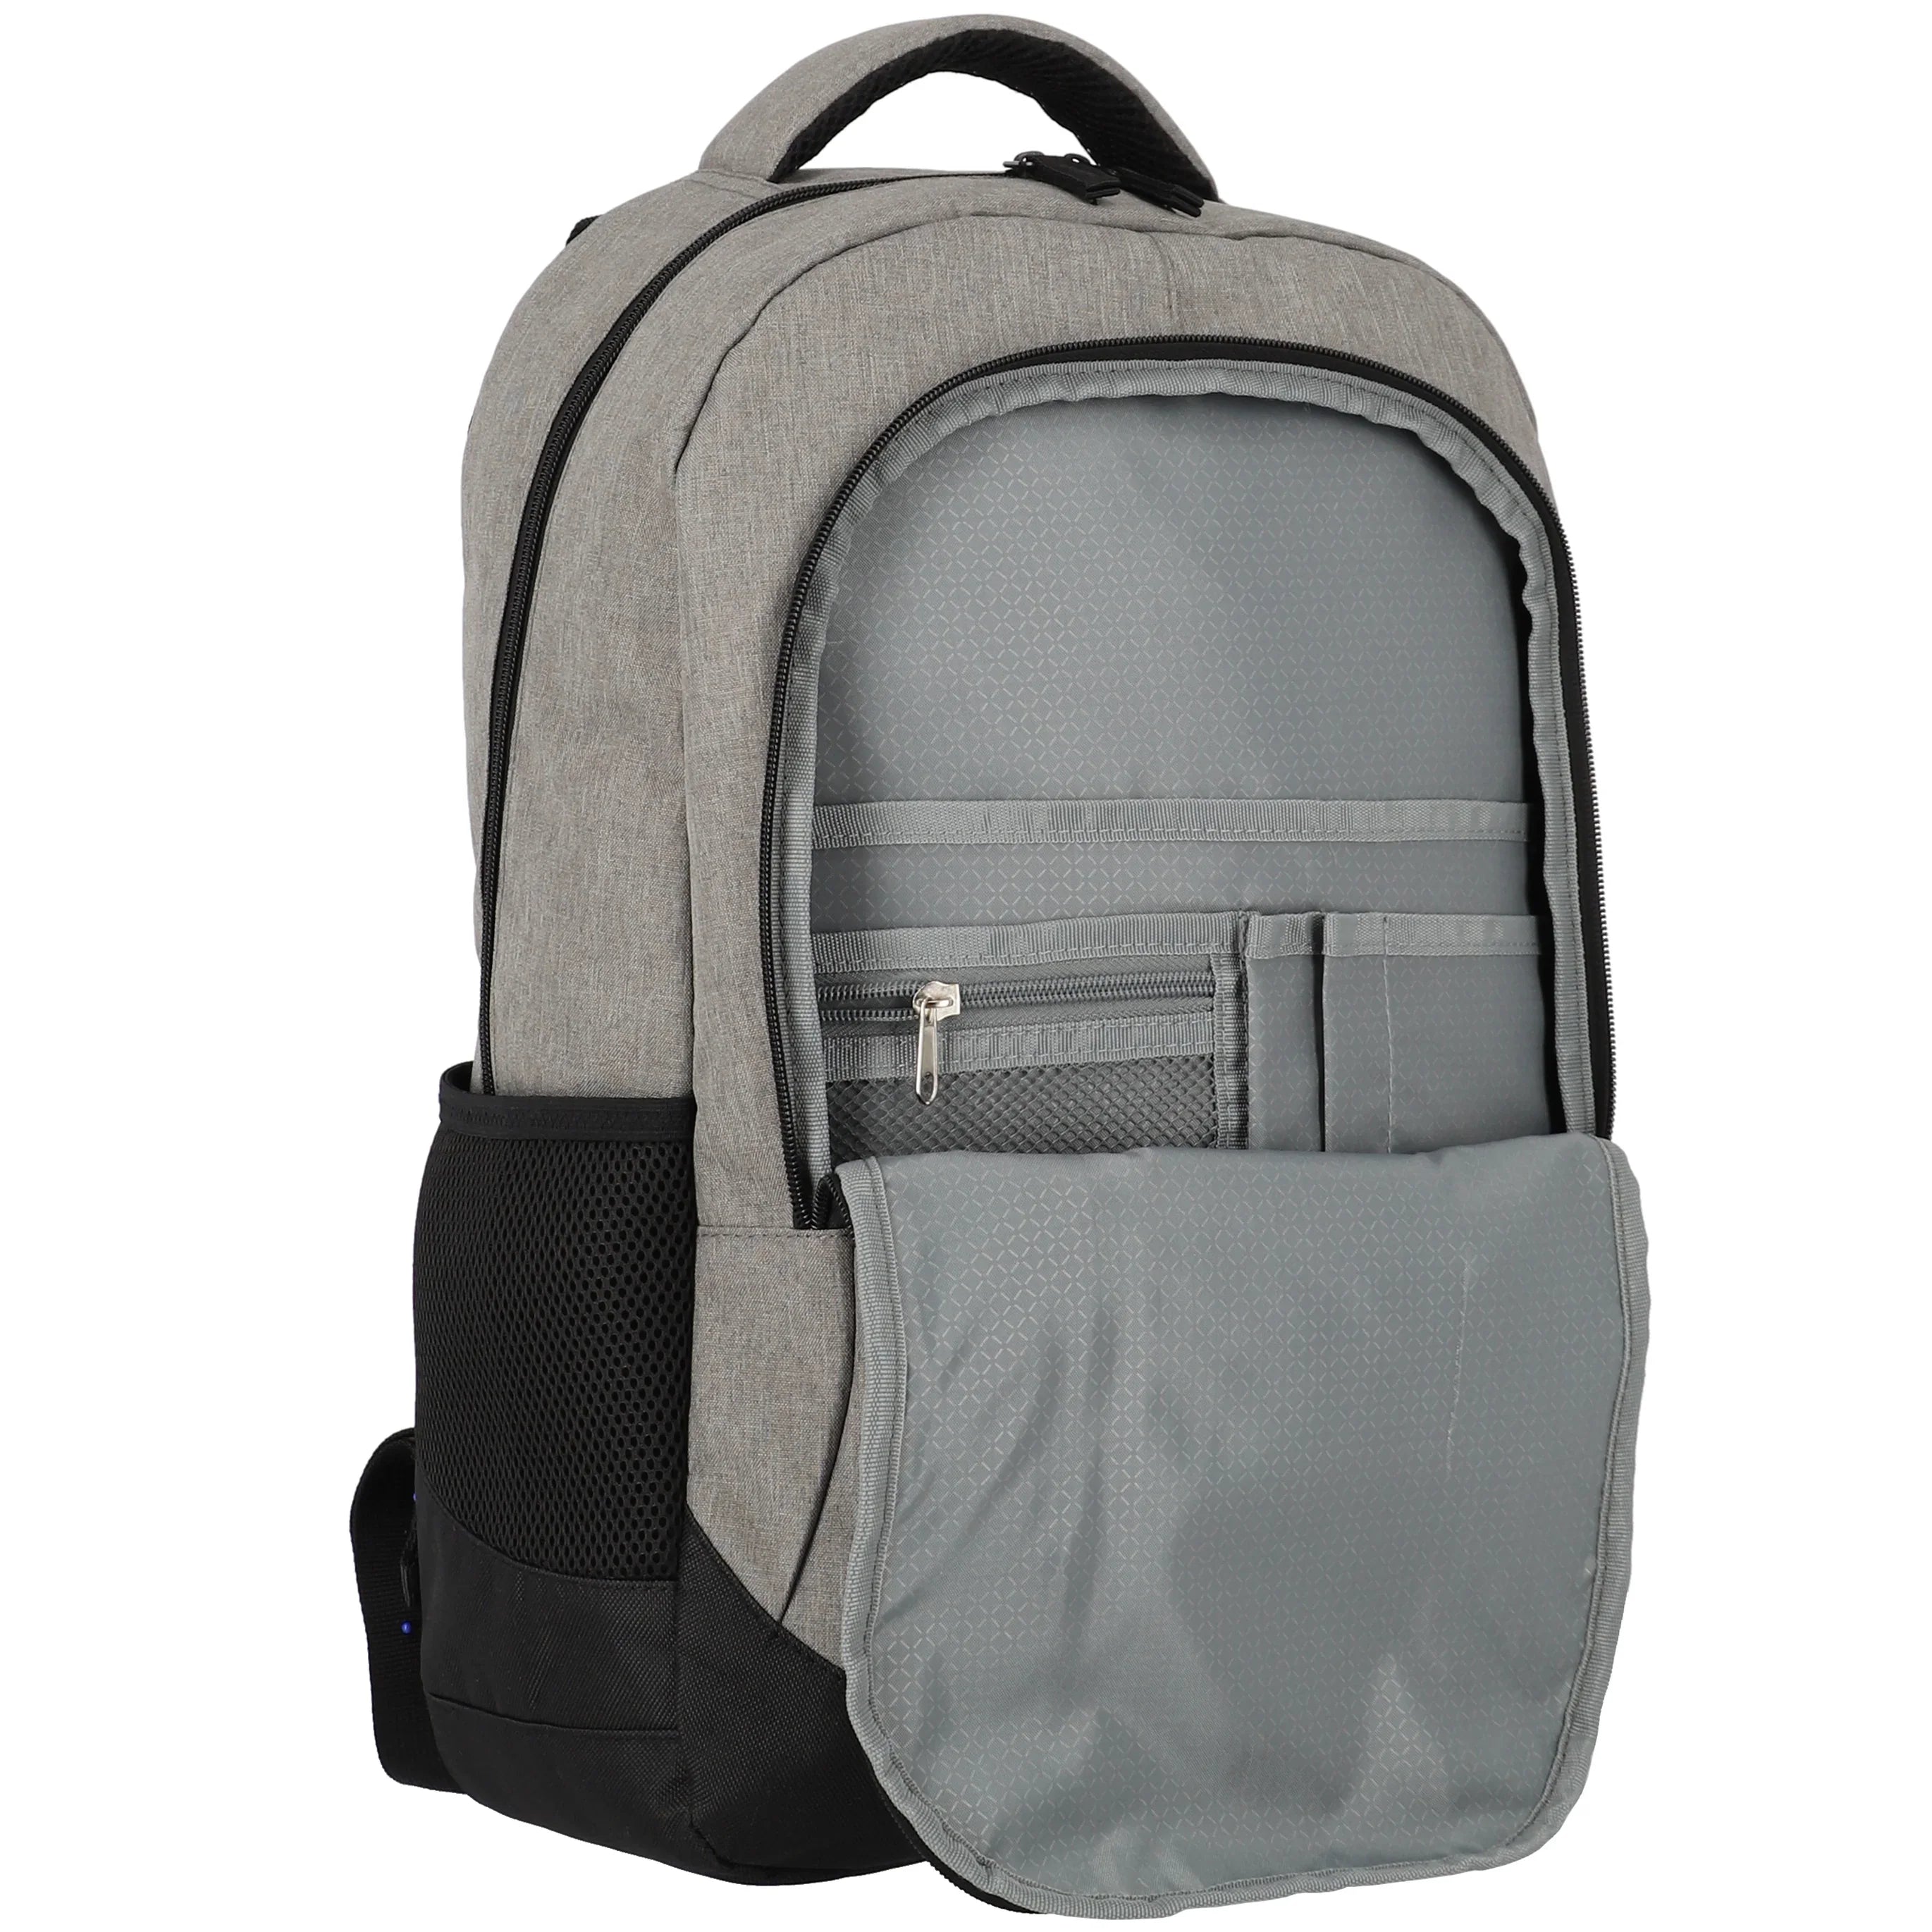 Travelite Cruise Backpack 46 cm - Anthracite